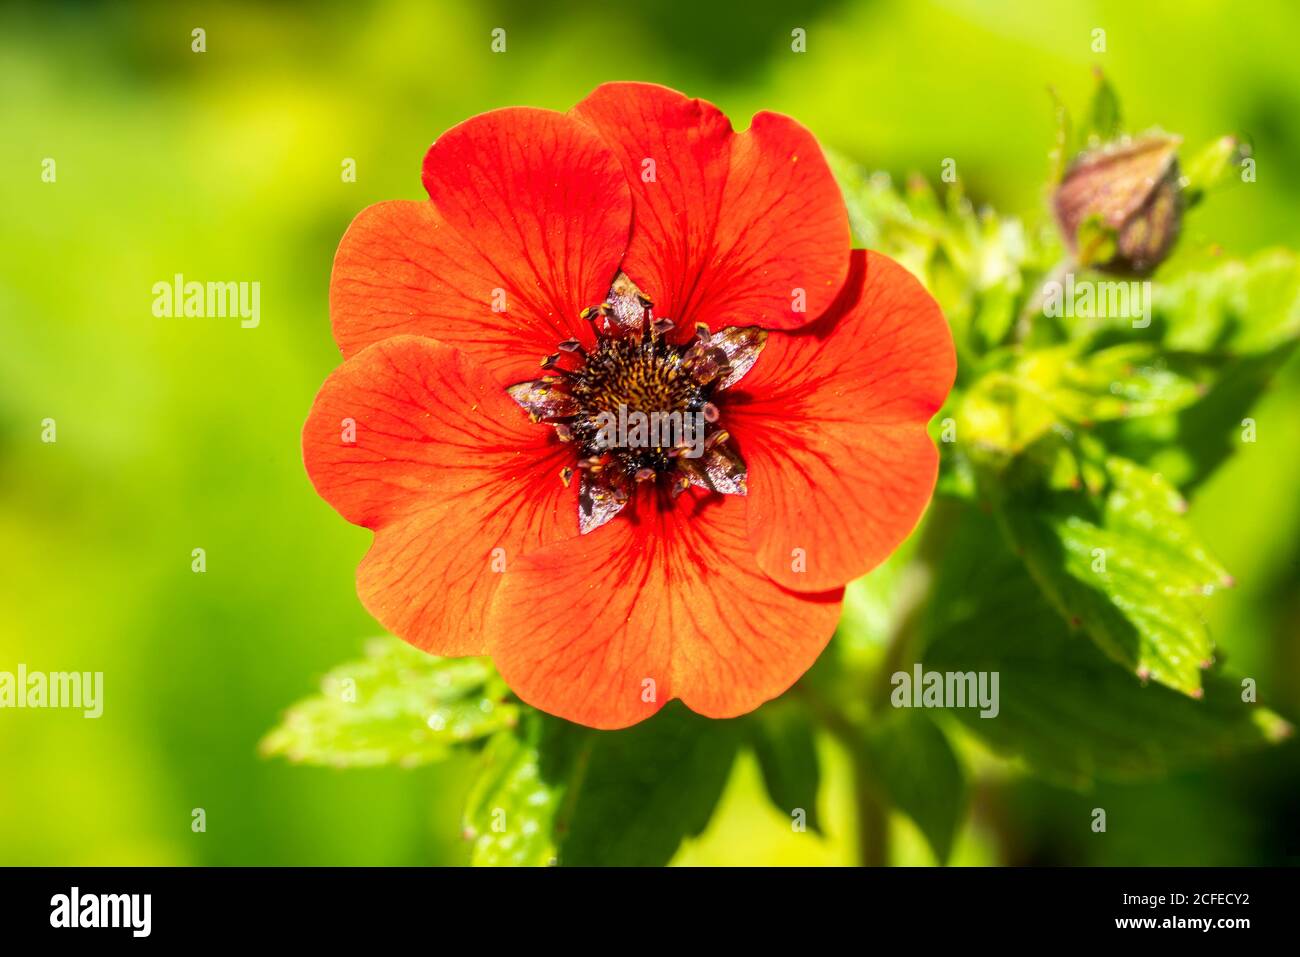 Potentilla 'Gibson's Scarlet' a red summer flower plant commonly known as cinquefoil stock photo image Stock Photo